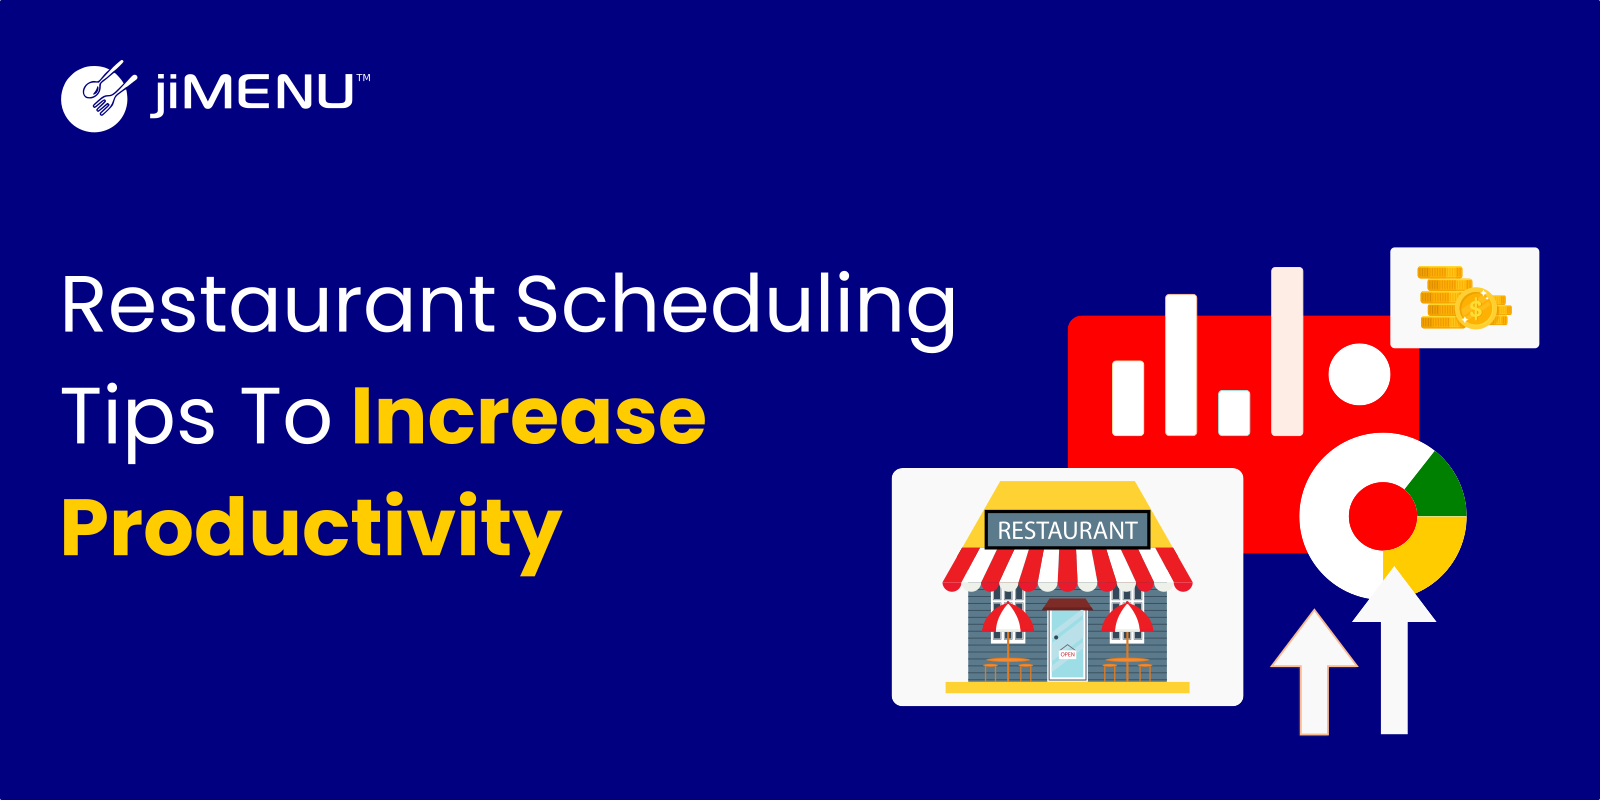 How to Increase the Productivity of the Restaurant with Scheduling Tips?